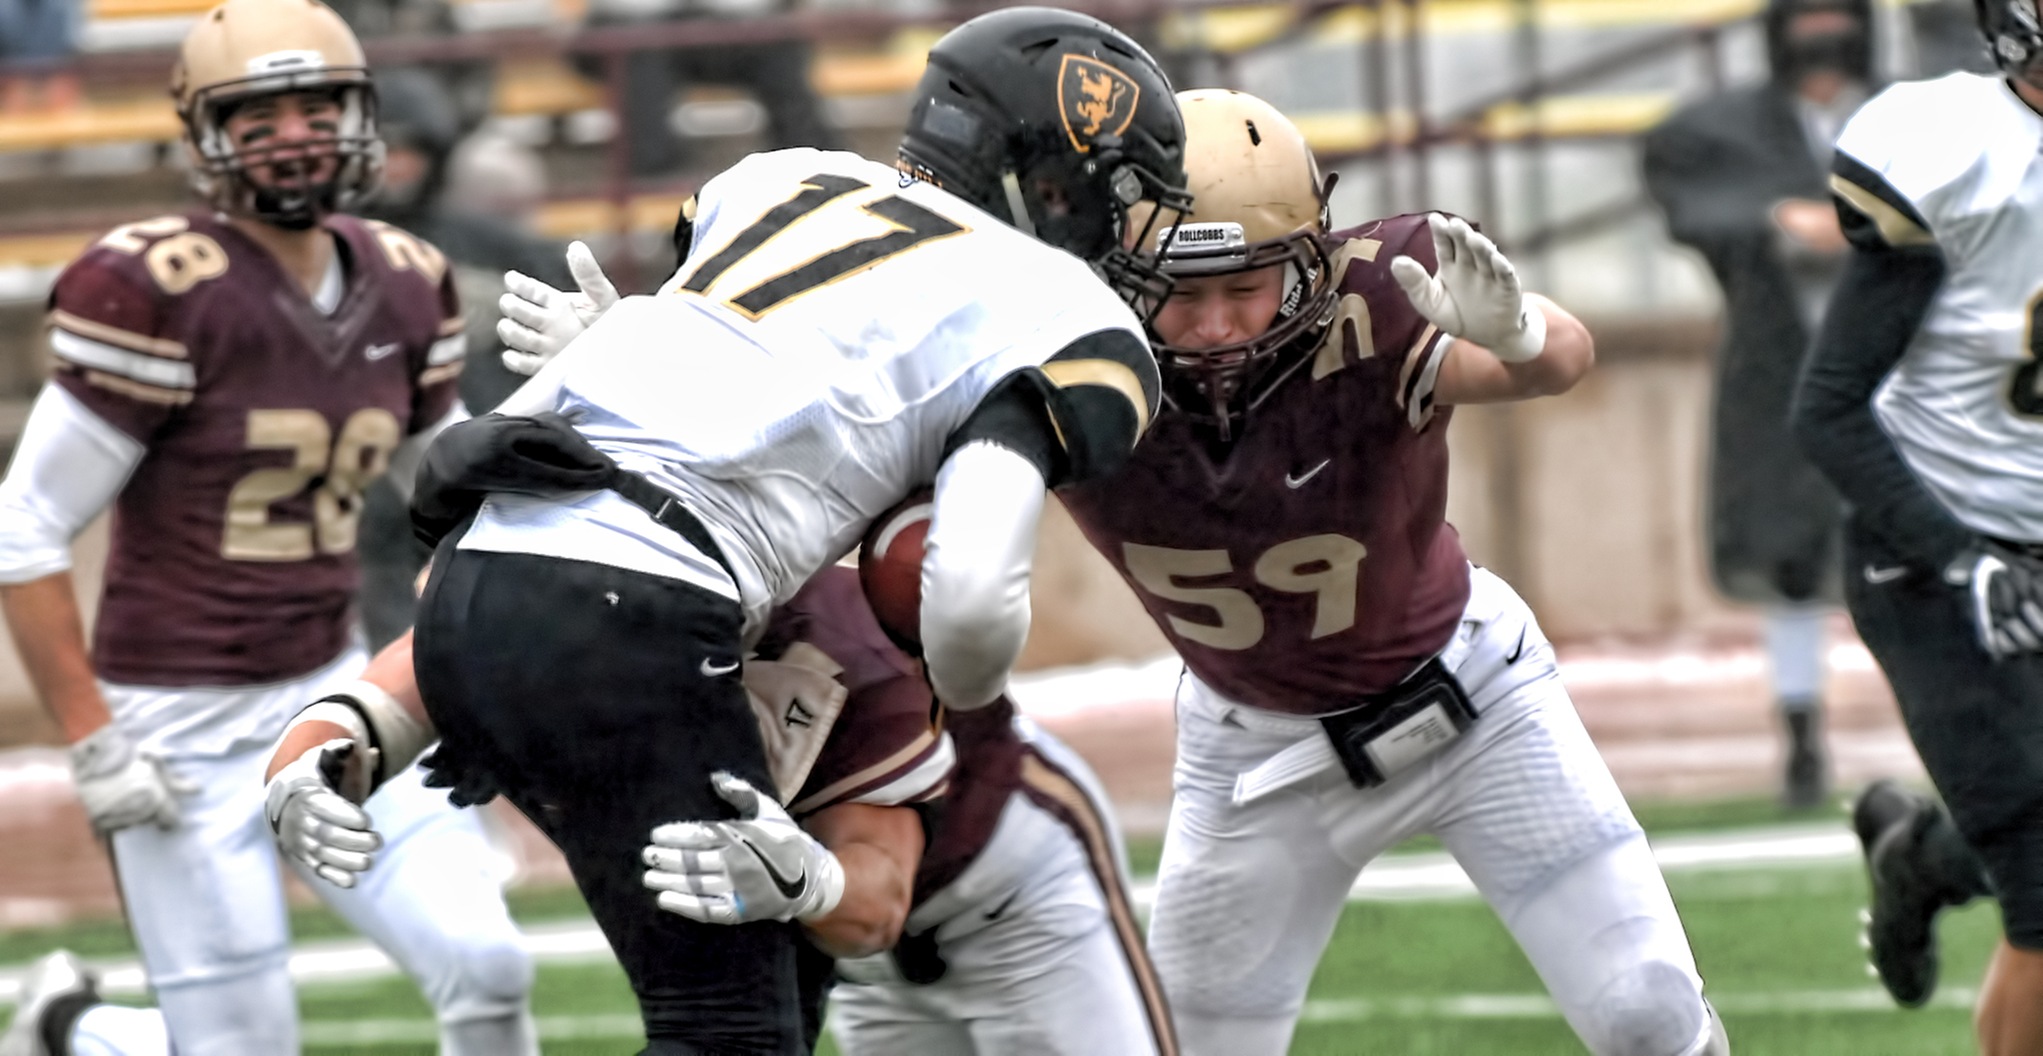 Junior linebacker Alex Berg gets set to help with a tackled during the Cobbers' 54-12 win over St. Olaf.